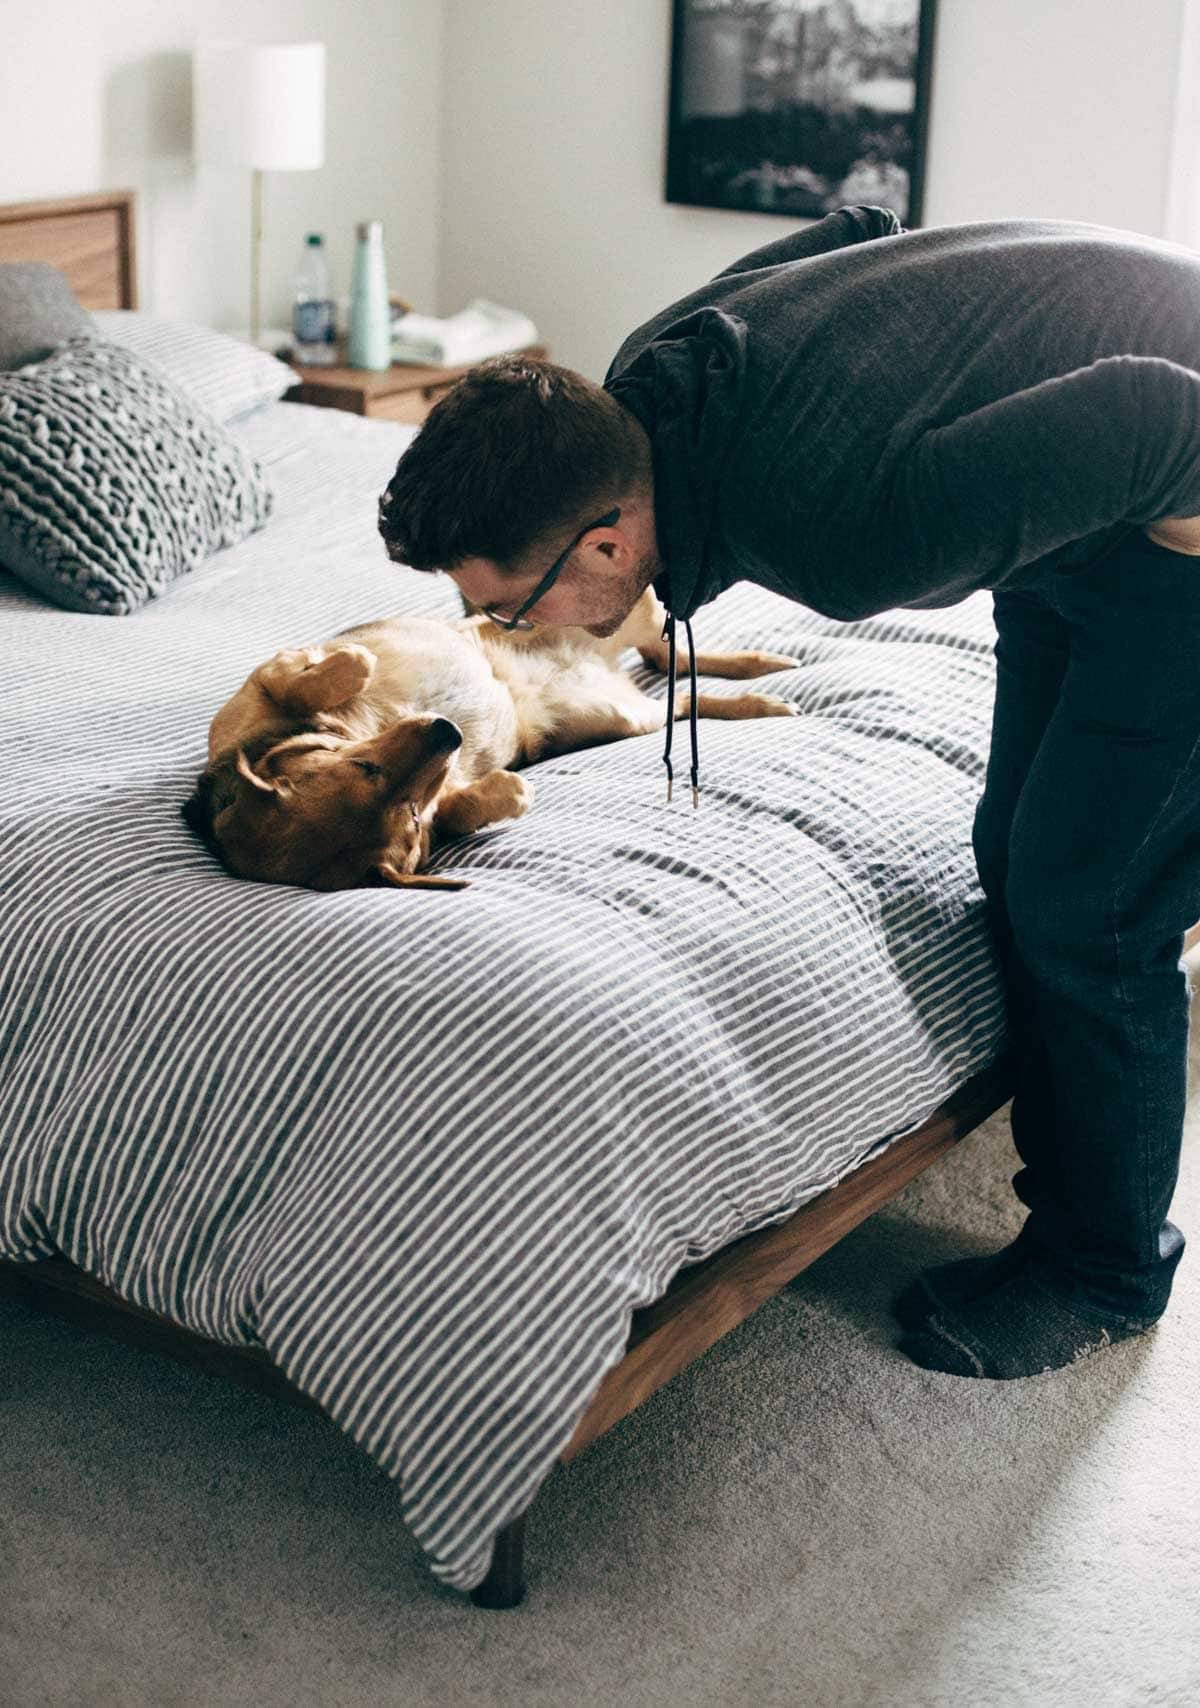 A man leaning over a dog lying on a bed.